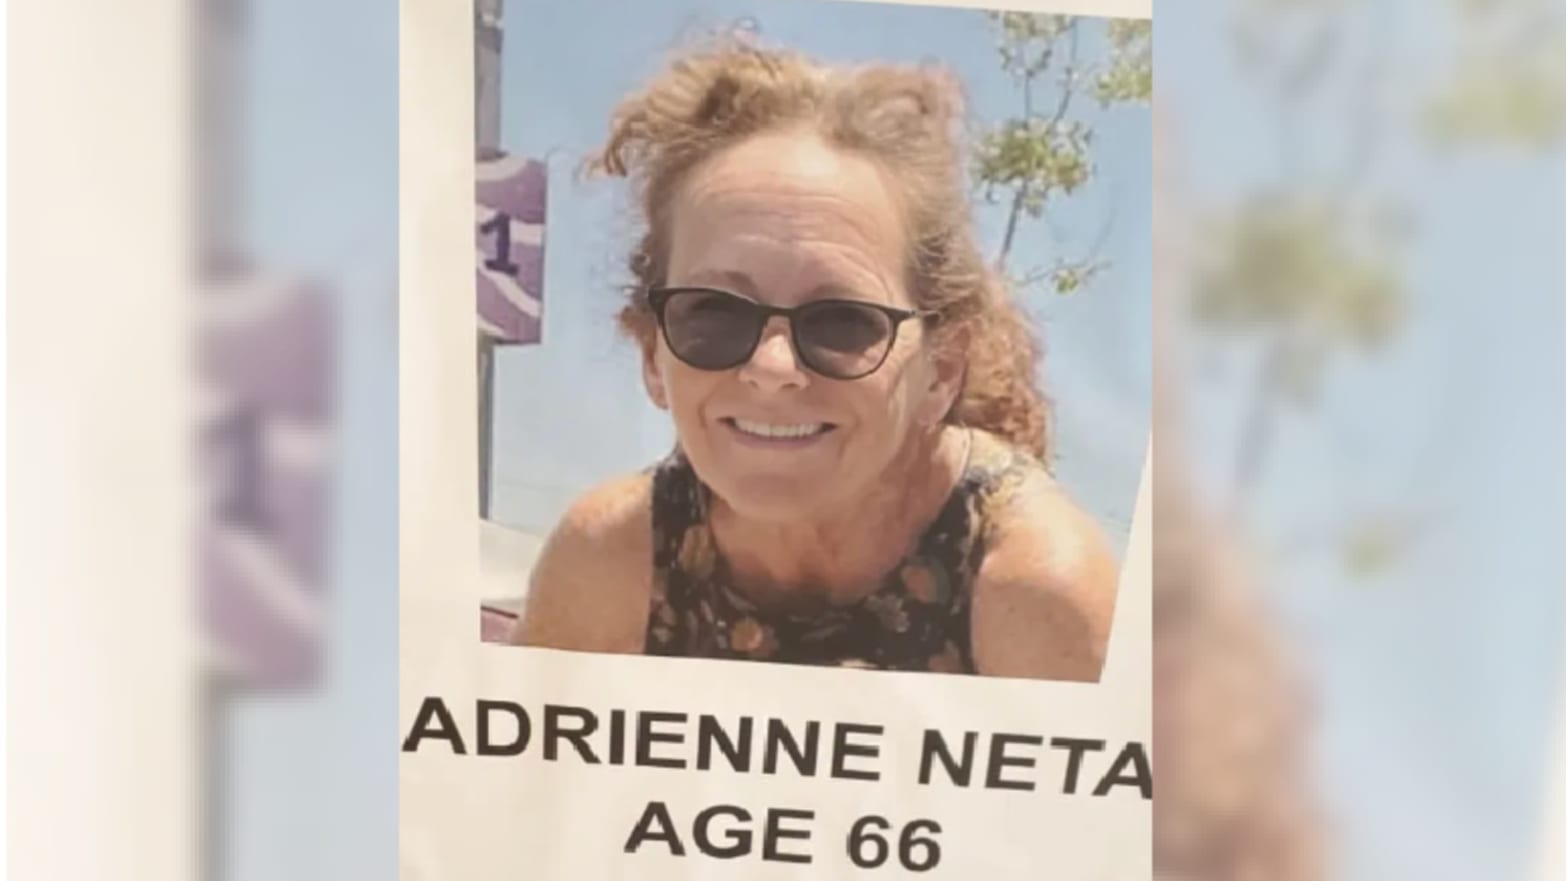 Photo of Adrienne Neta smiling used at a press conference.